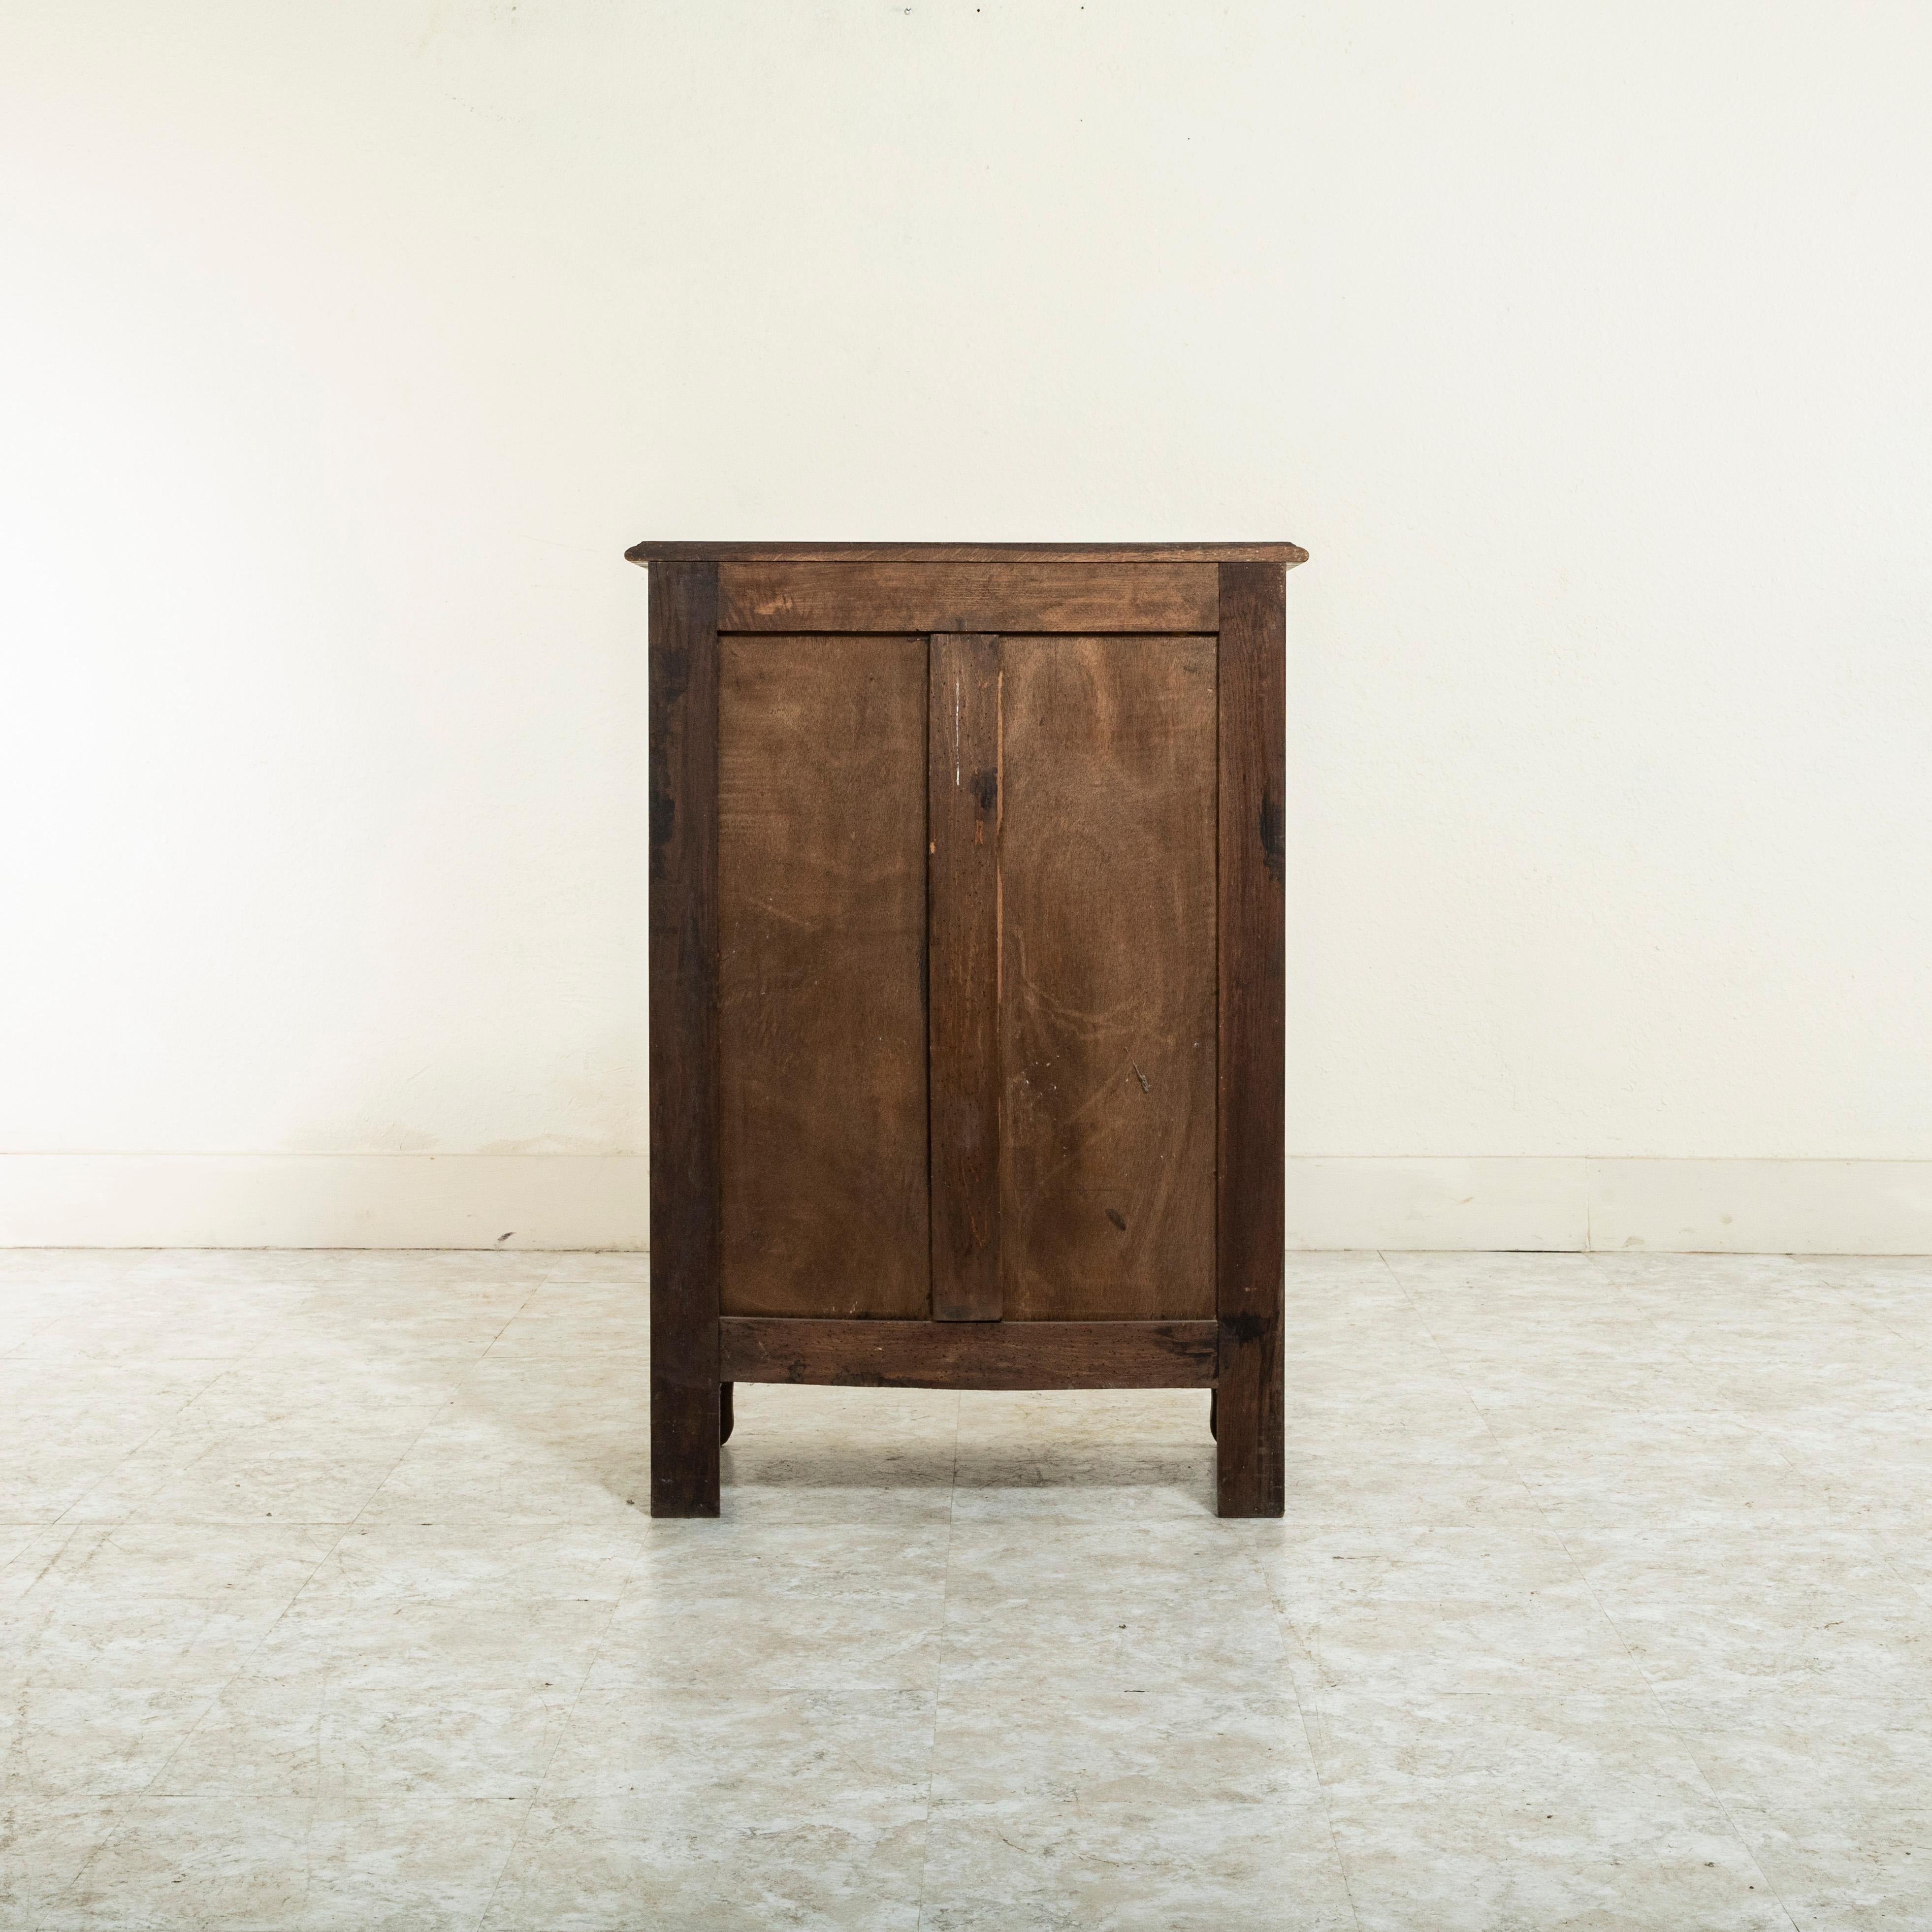 20th Century Early Twentieth century French Hand-Carved Oak Jam Cabinet from Brittany For Sale